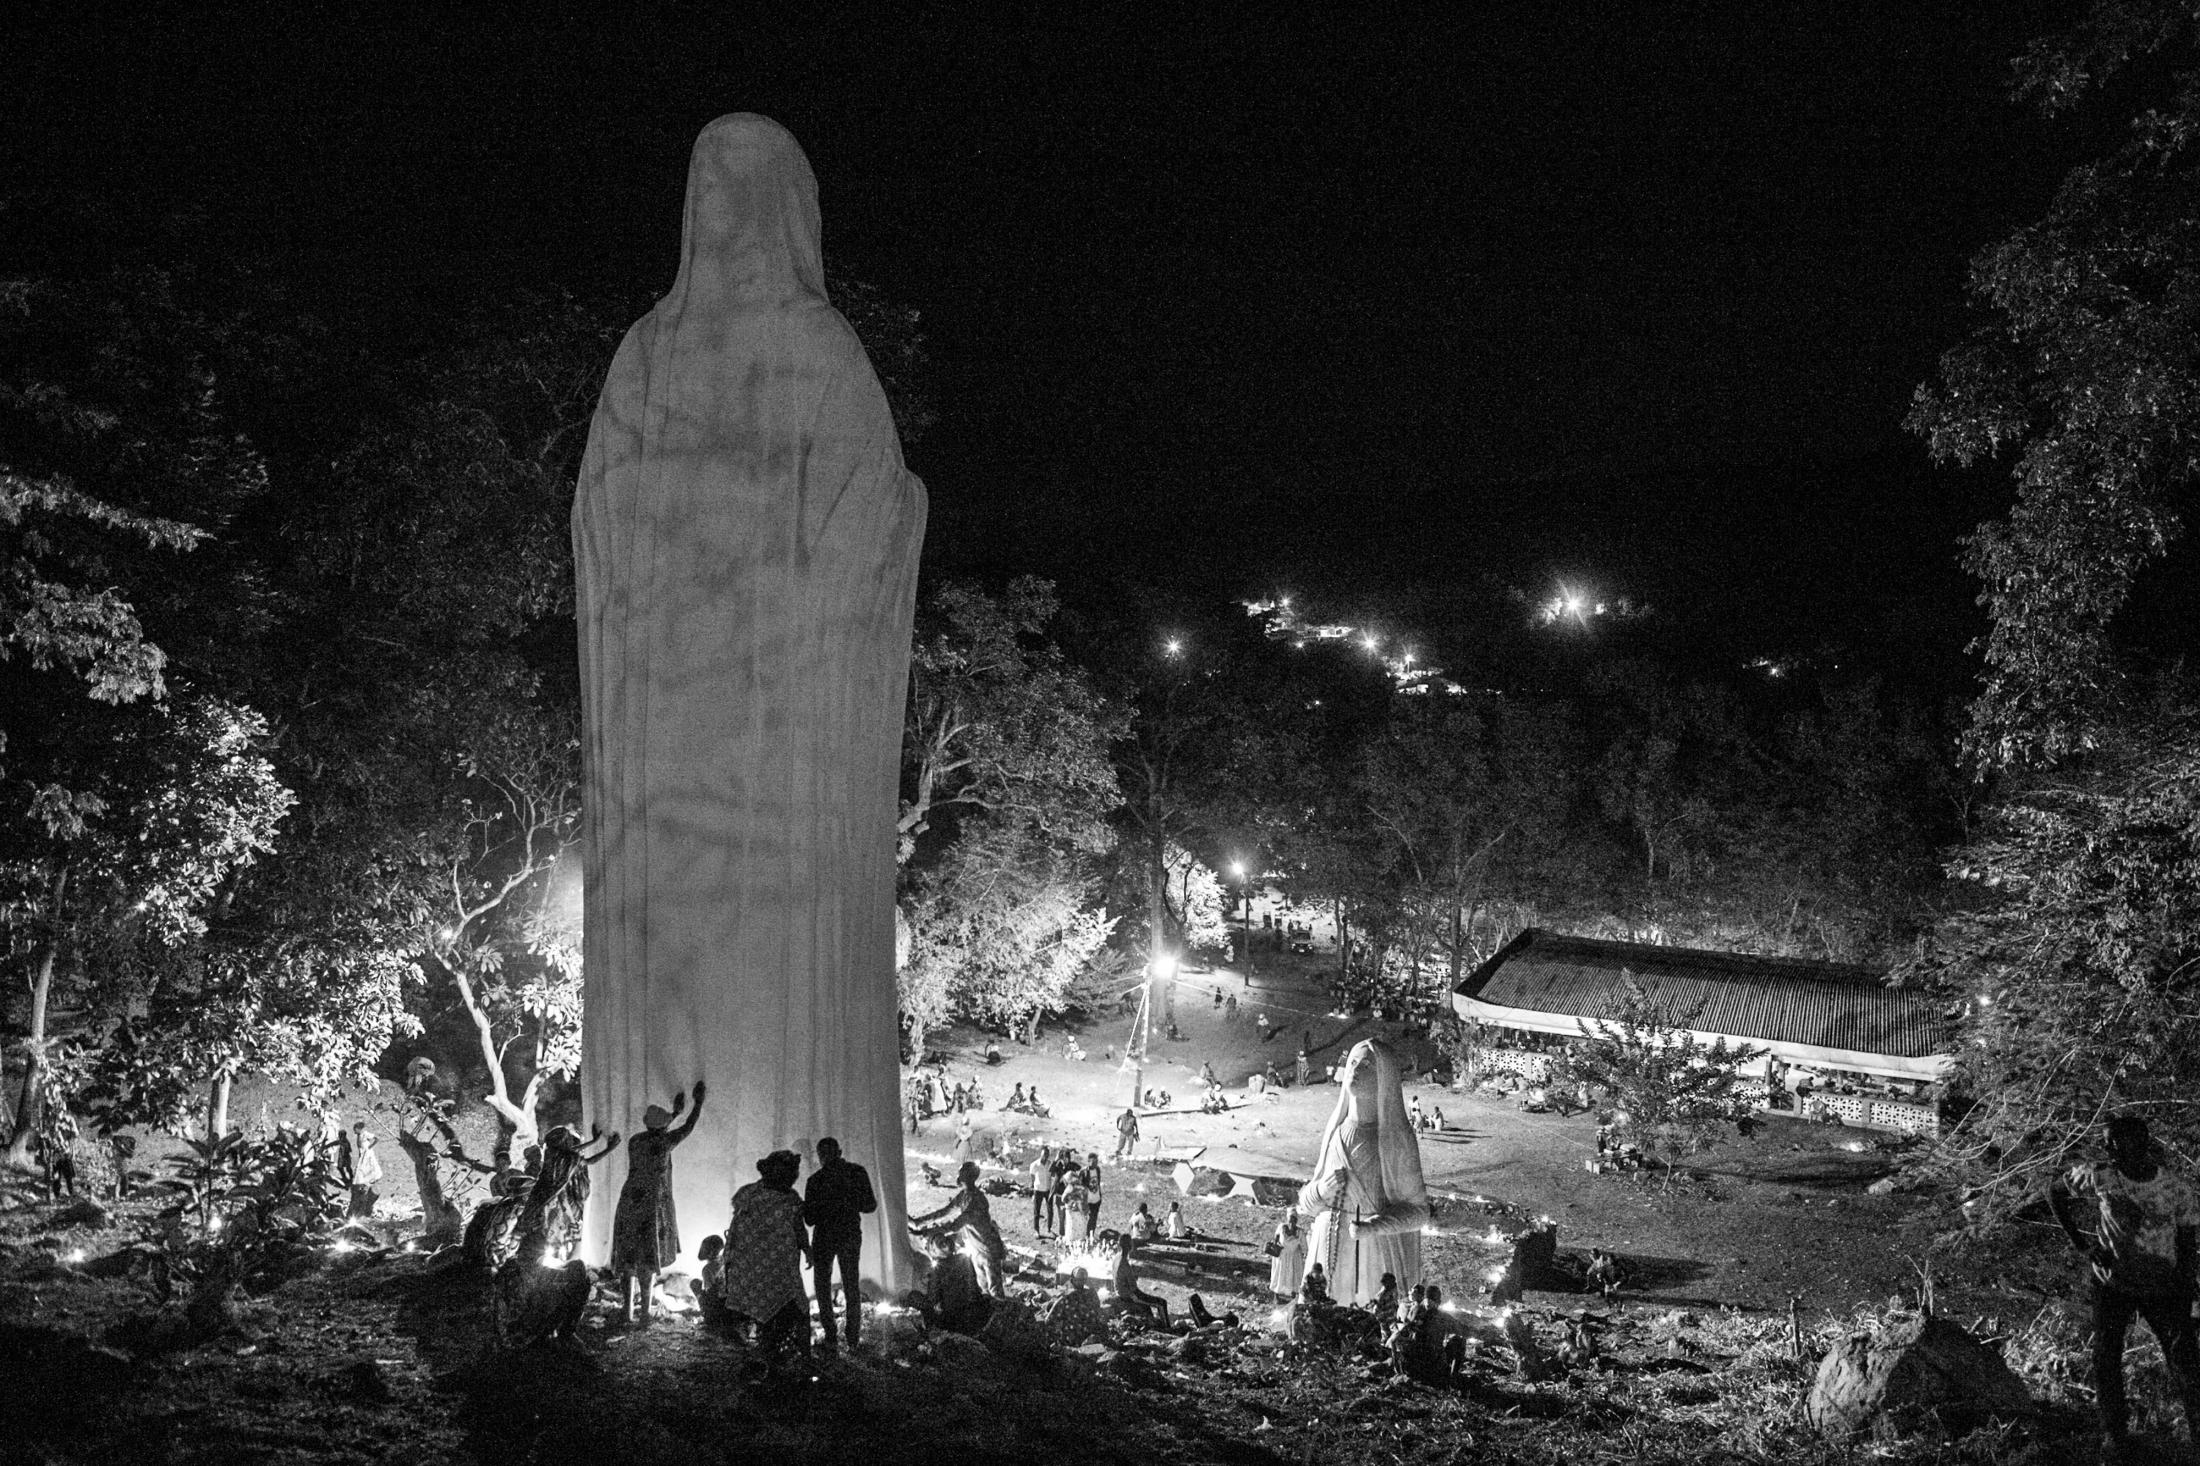 Pilgrims touch a giant statue of Maria to pray, the mother of Jesus the centrepiece of worship at the Our Lady of Lourdes grotto.